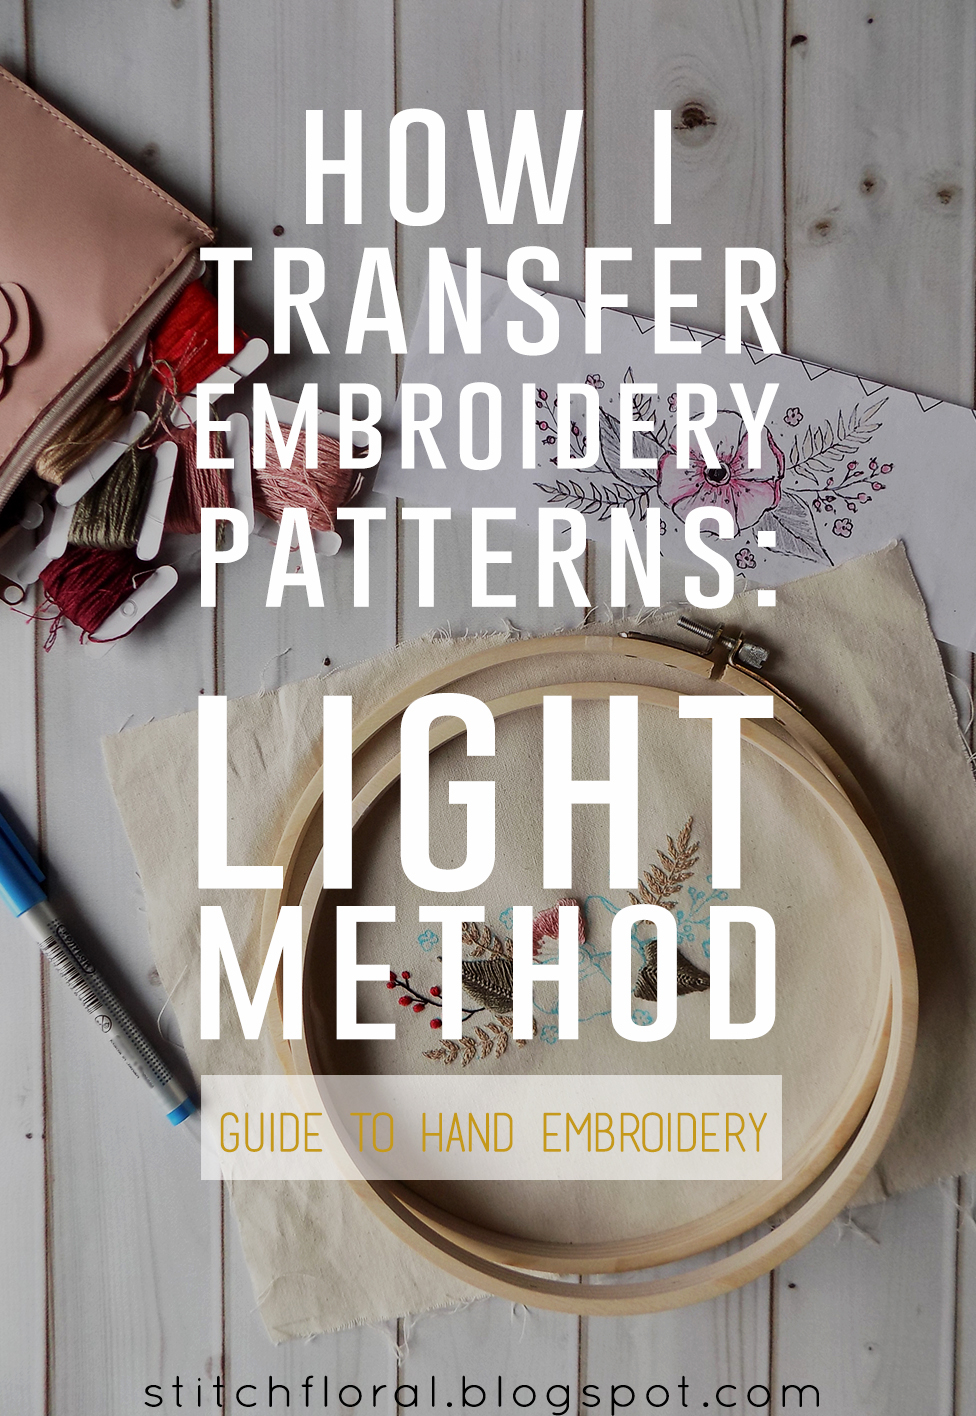 Hand Embroidery Transfer Patterns How I Transfer Embroidery Patterns Light Method Stitch Floral